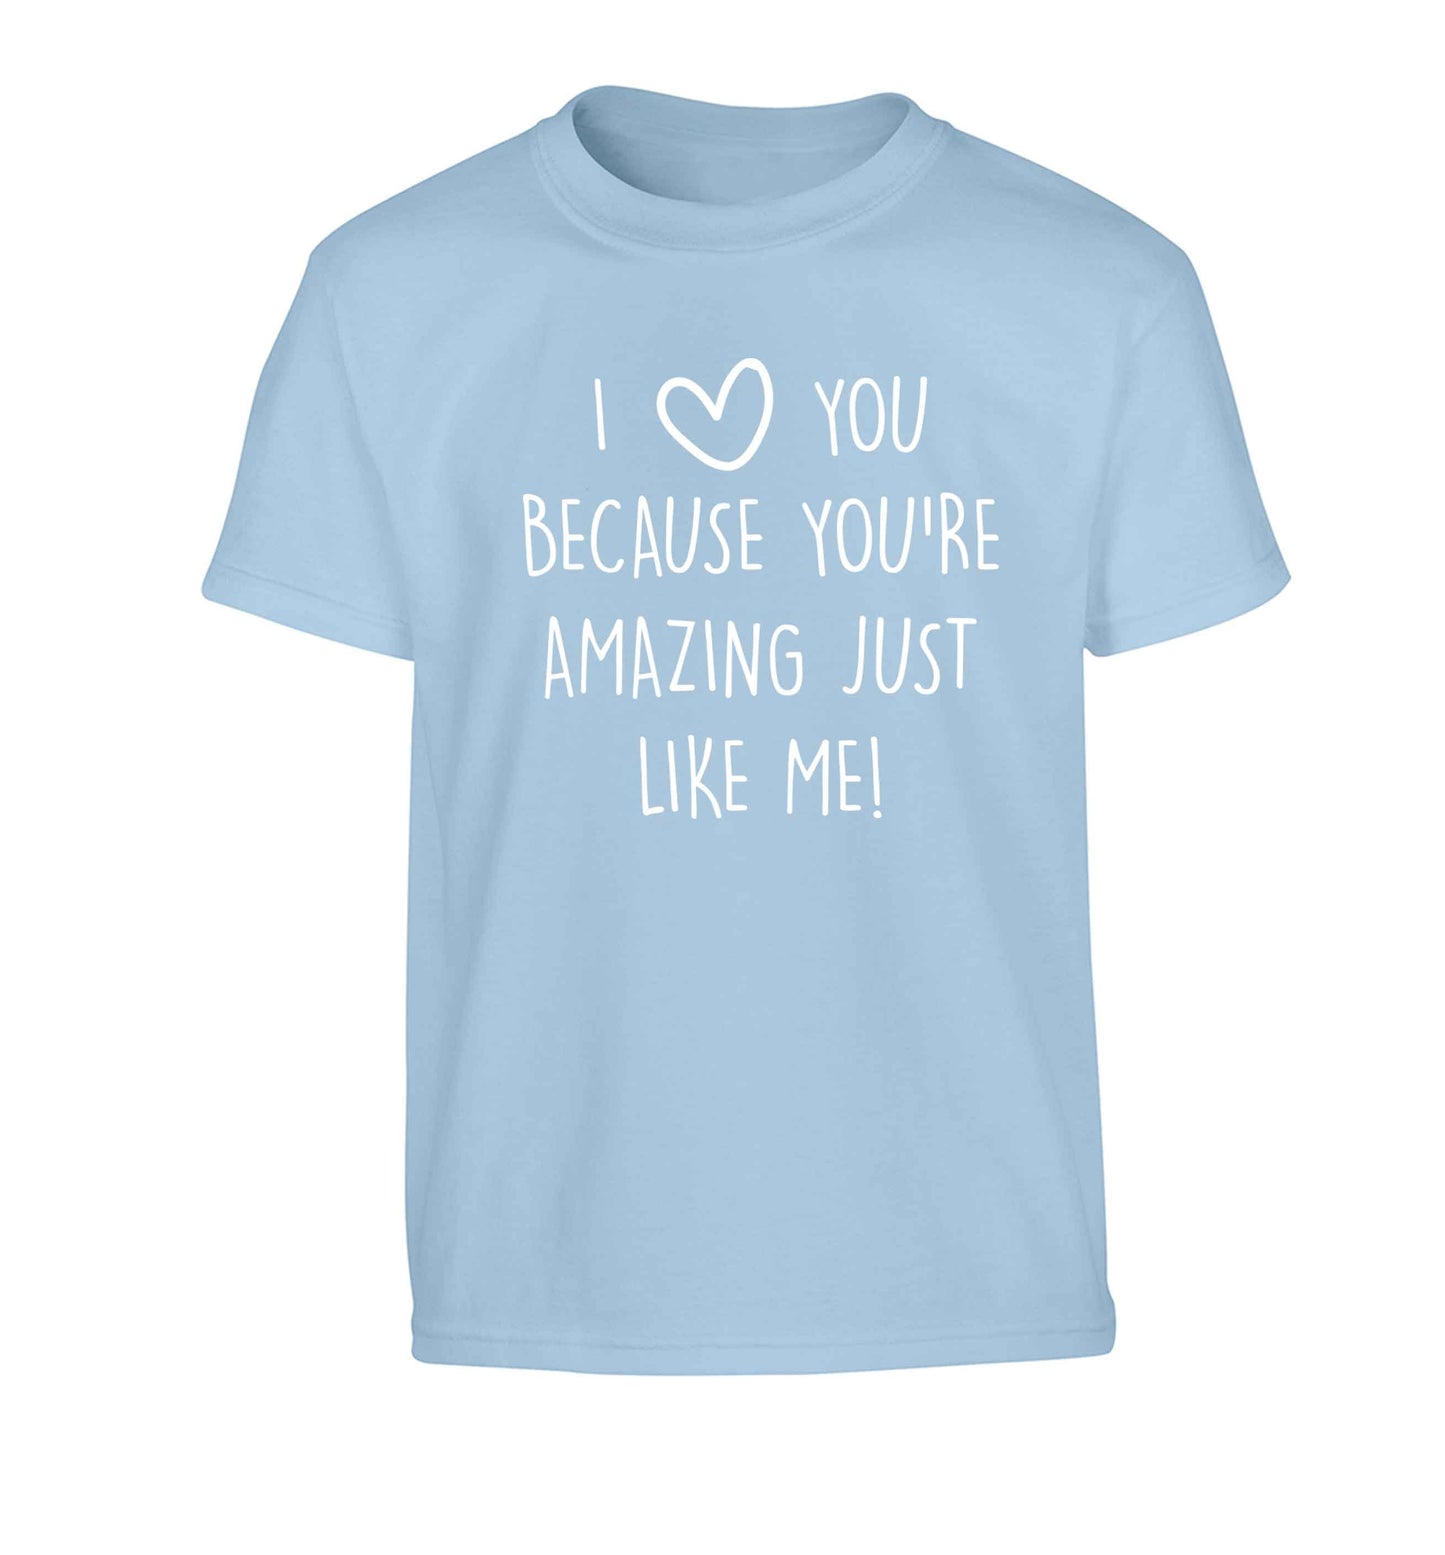 I love you because you're amazing just like me Children's light blue Tshirt 12-13 Years